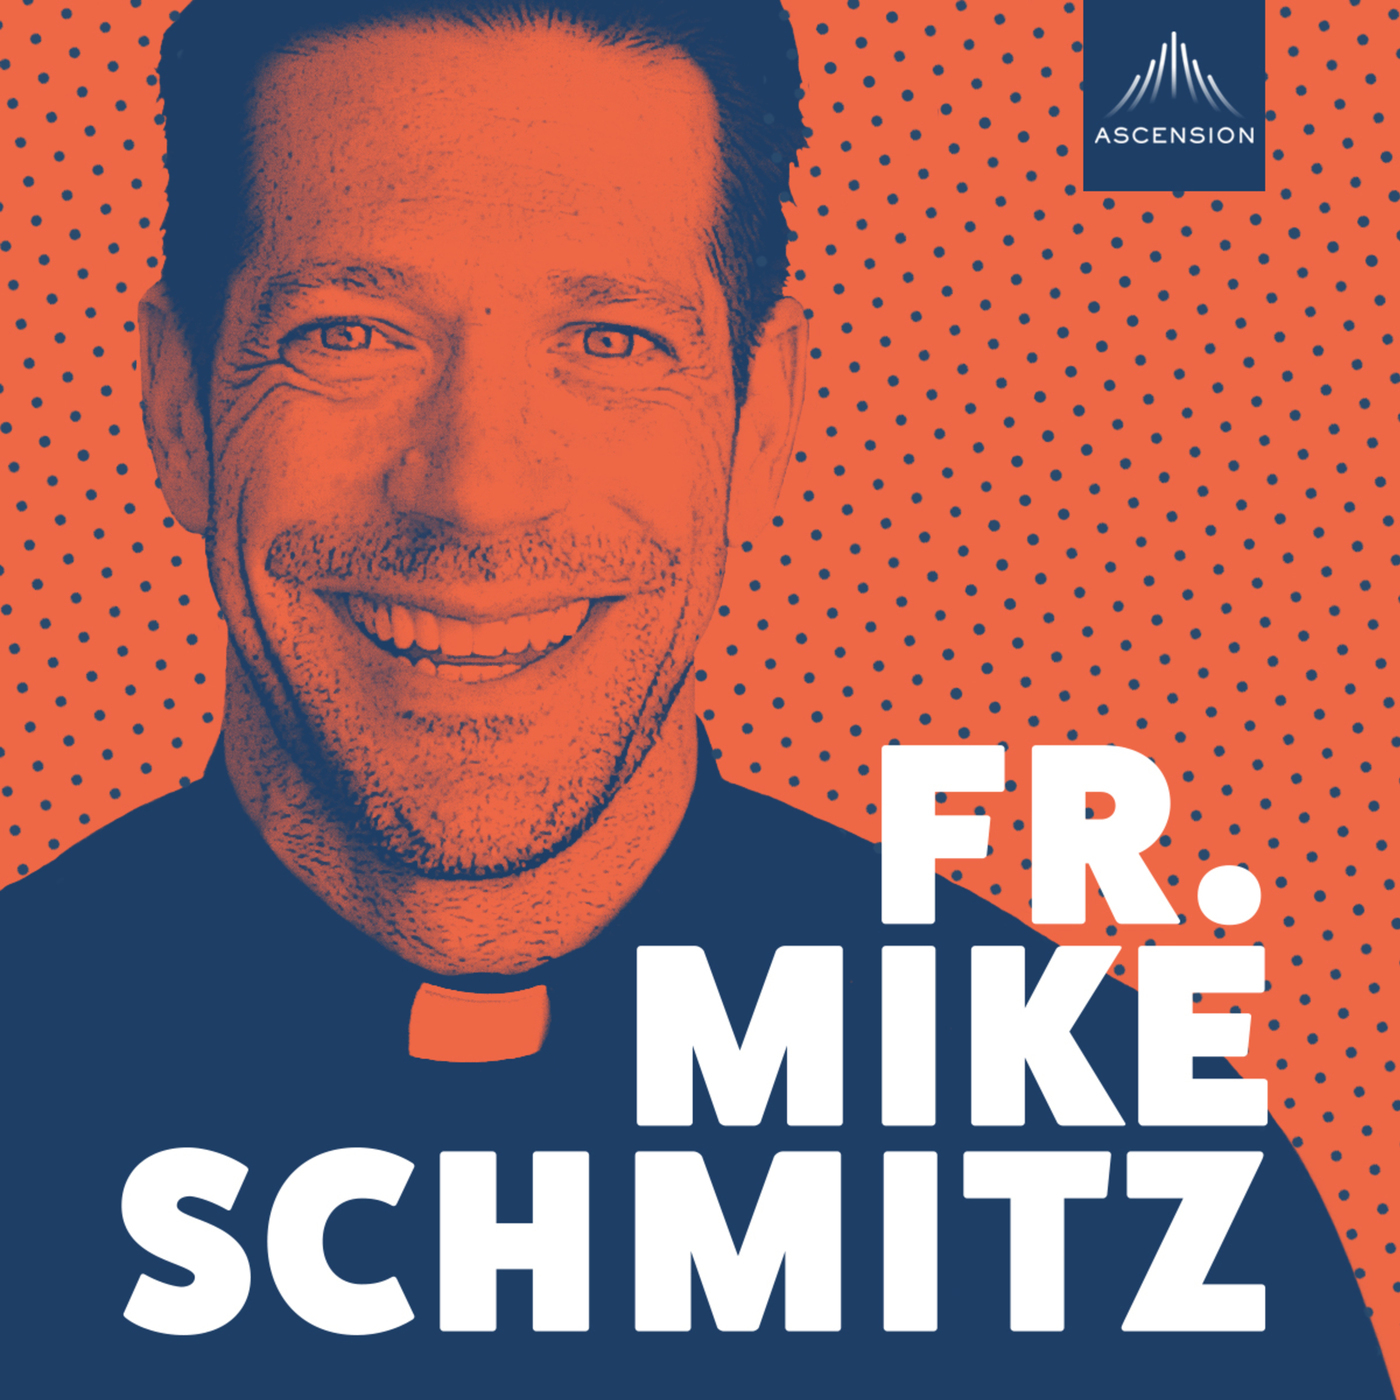 The Fr. Mike Schmitz Catholic Podcast: What's Inside a Humble Heart?